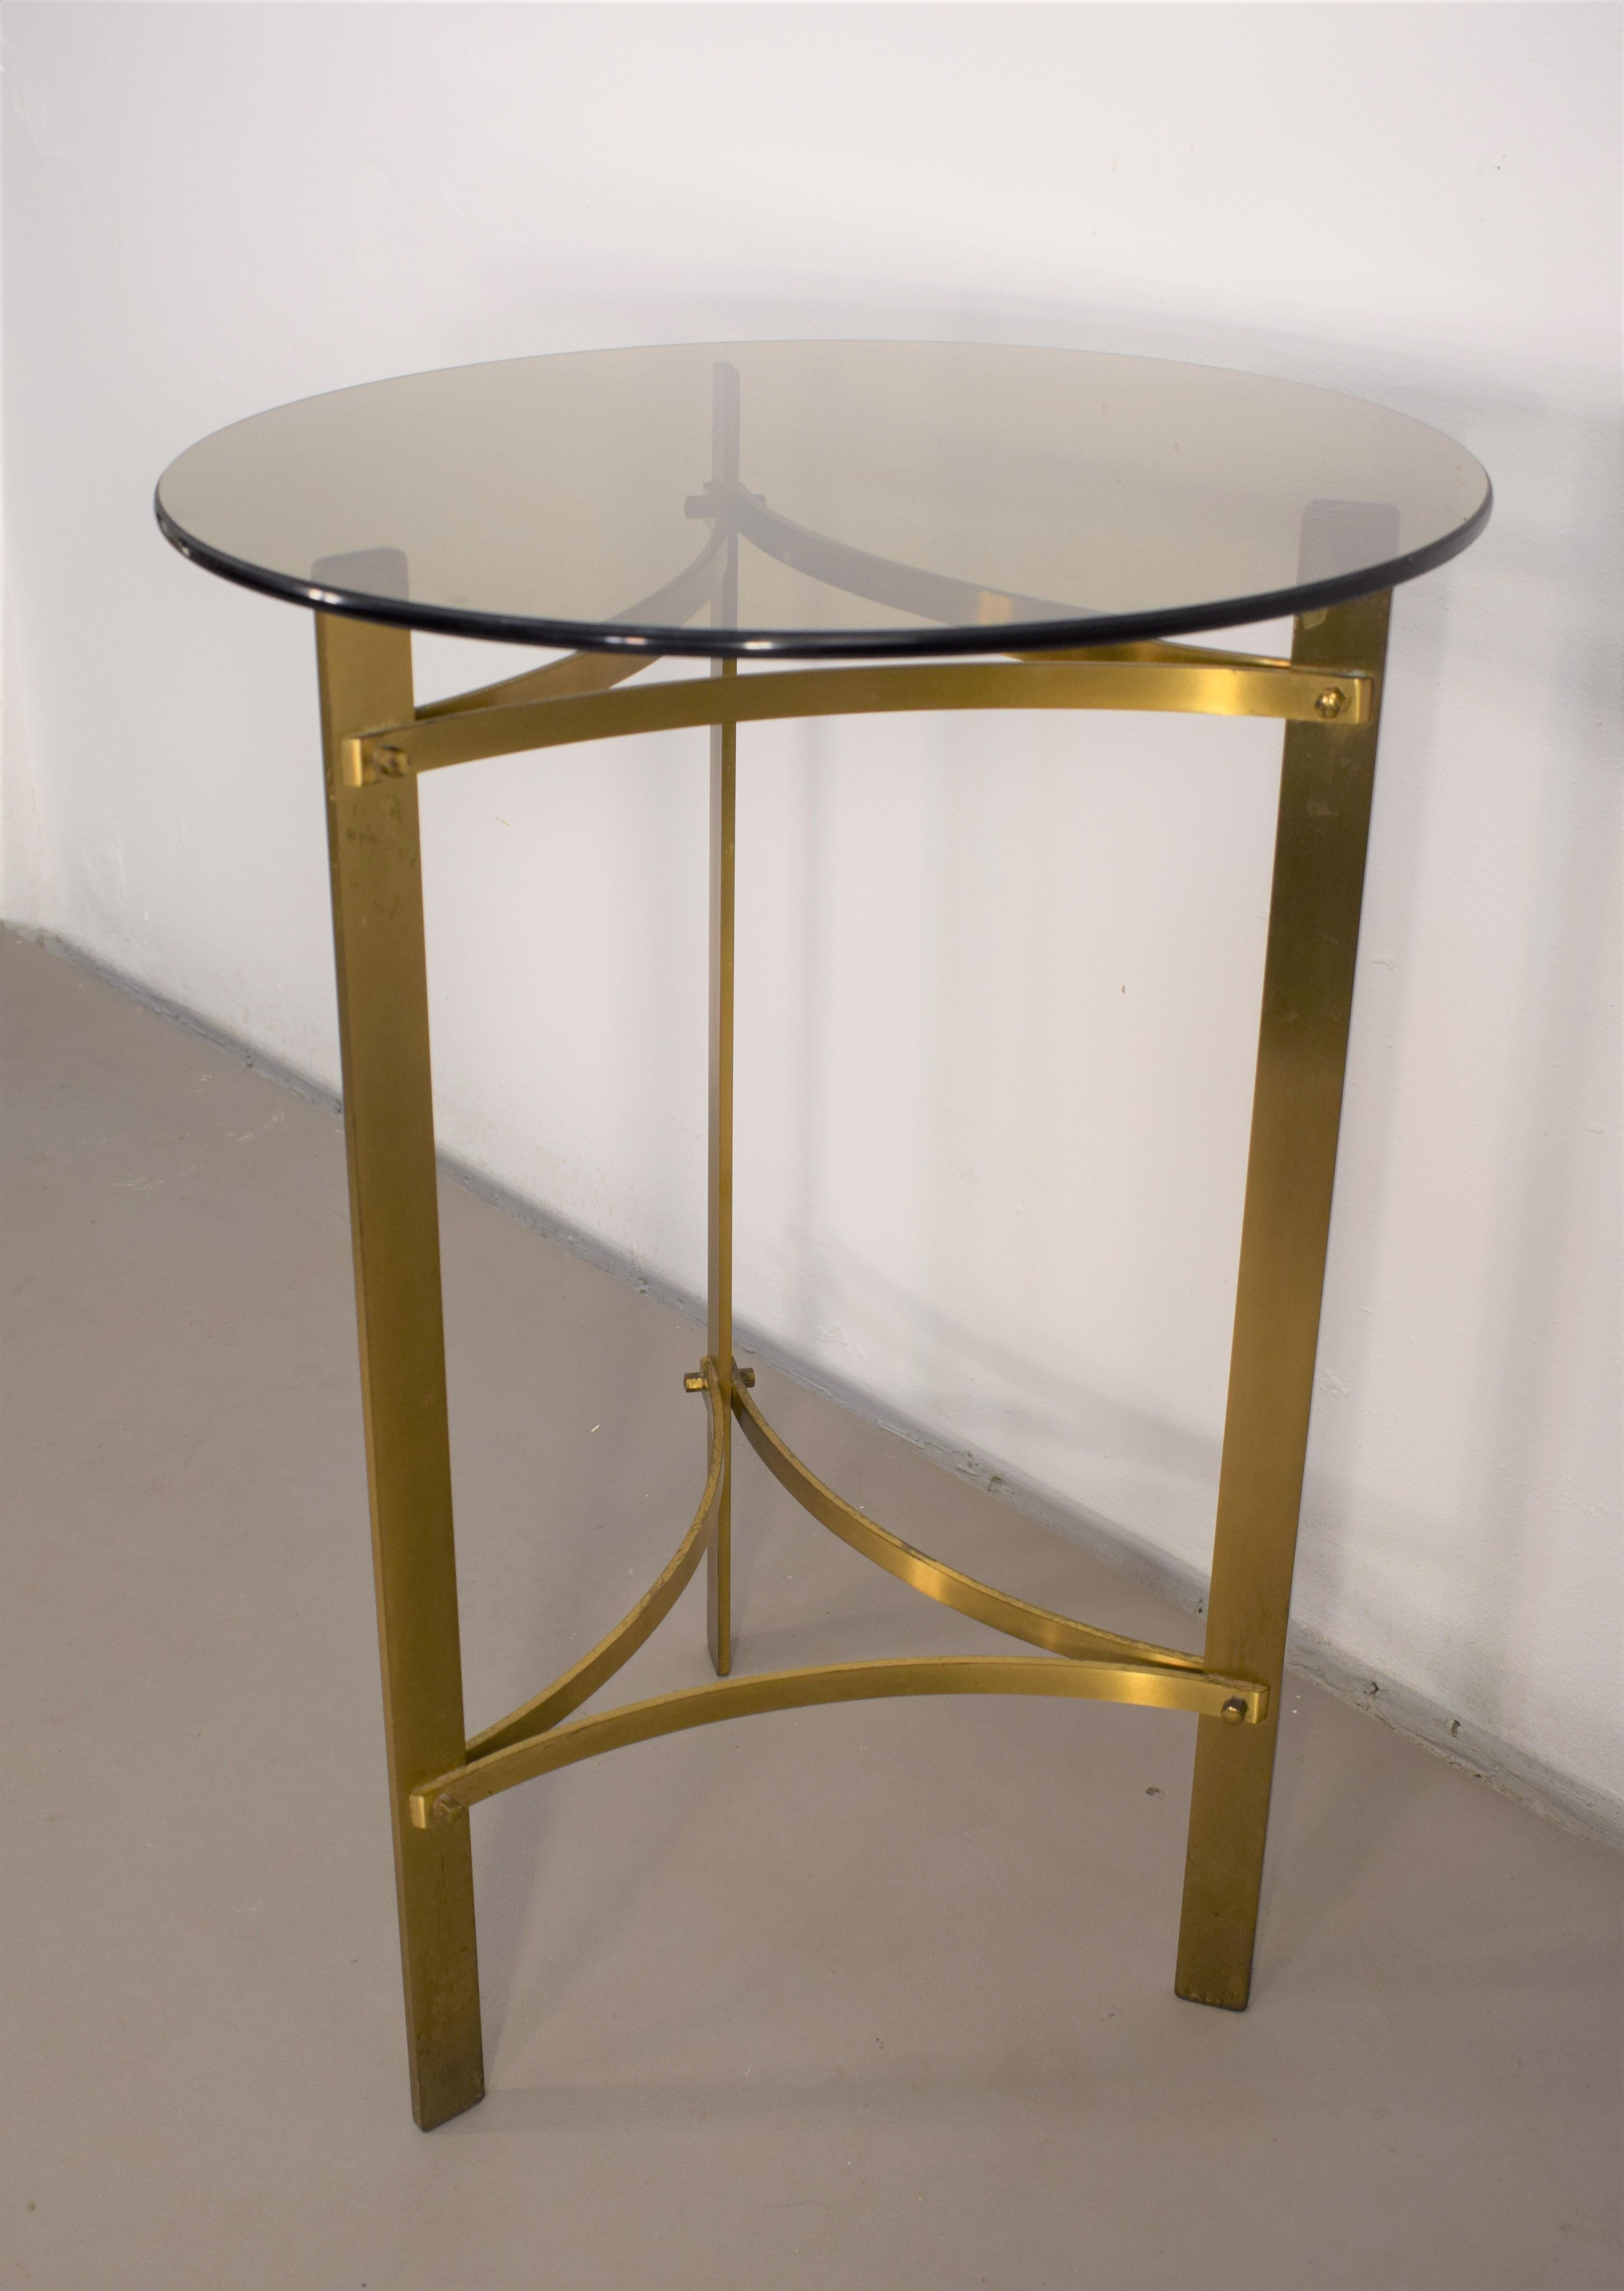 Italian Round Coffee Table, Brass and Smoked Glass, 1960s For Sale 2